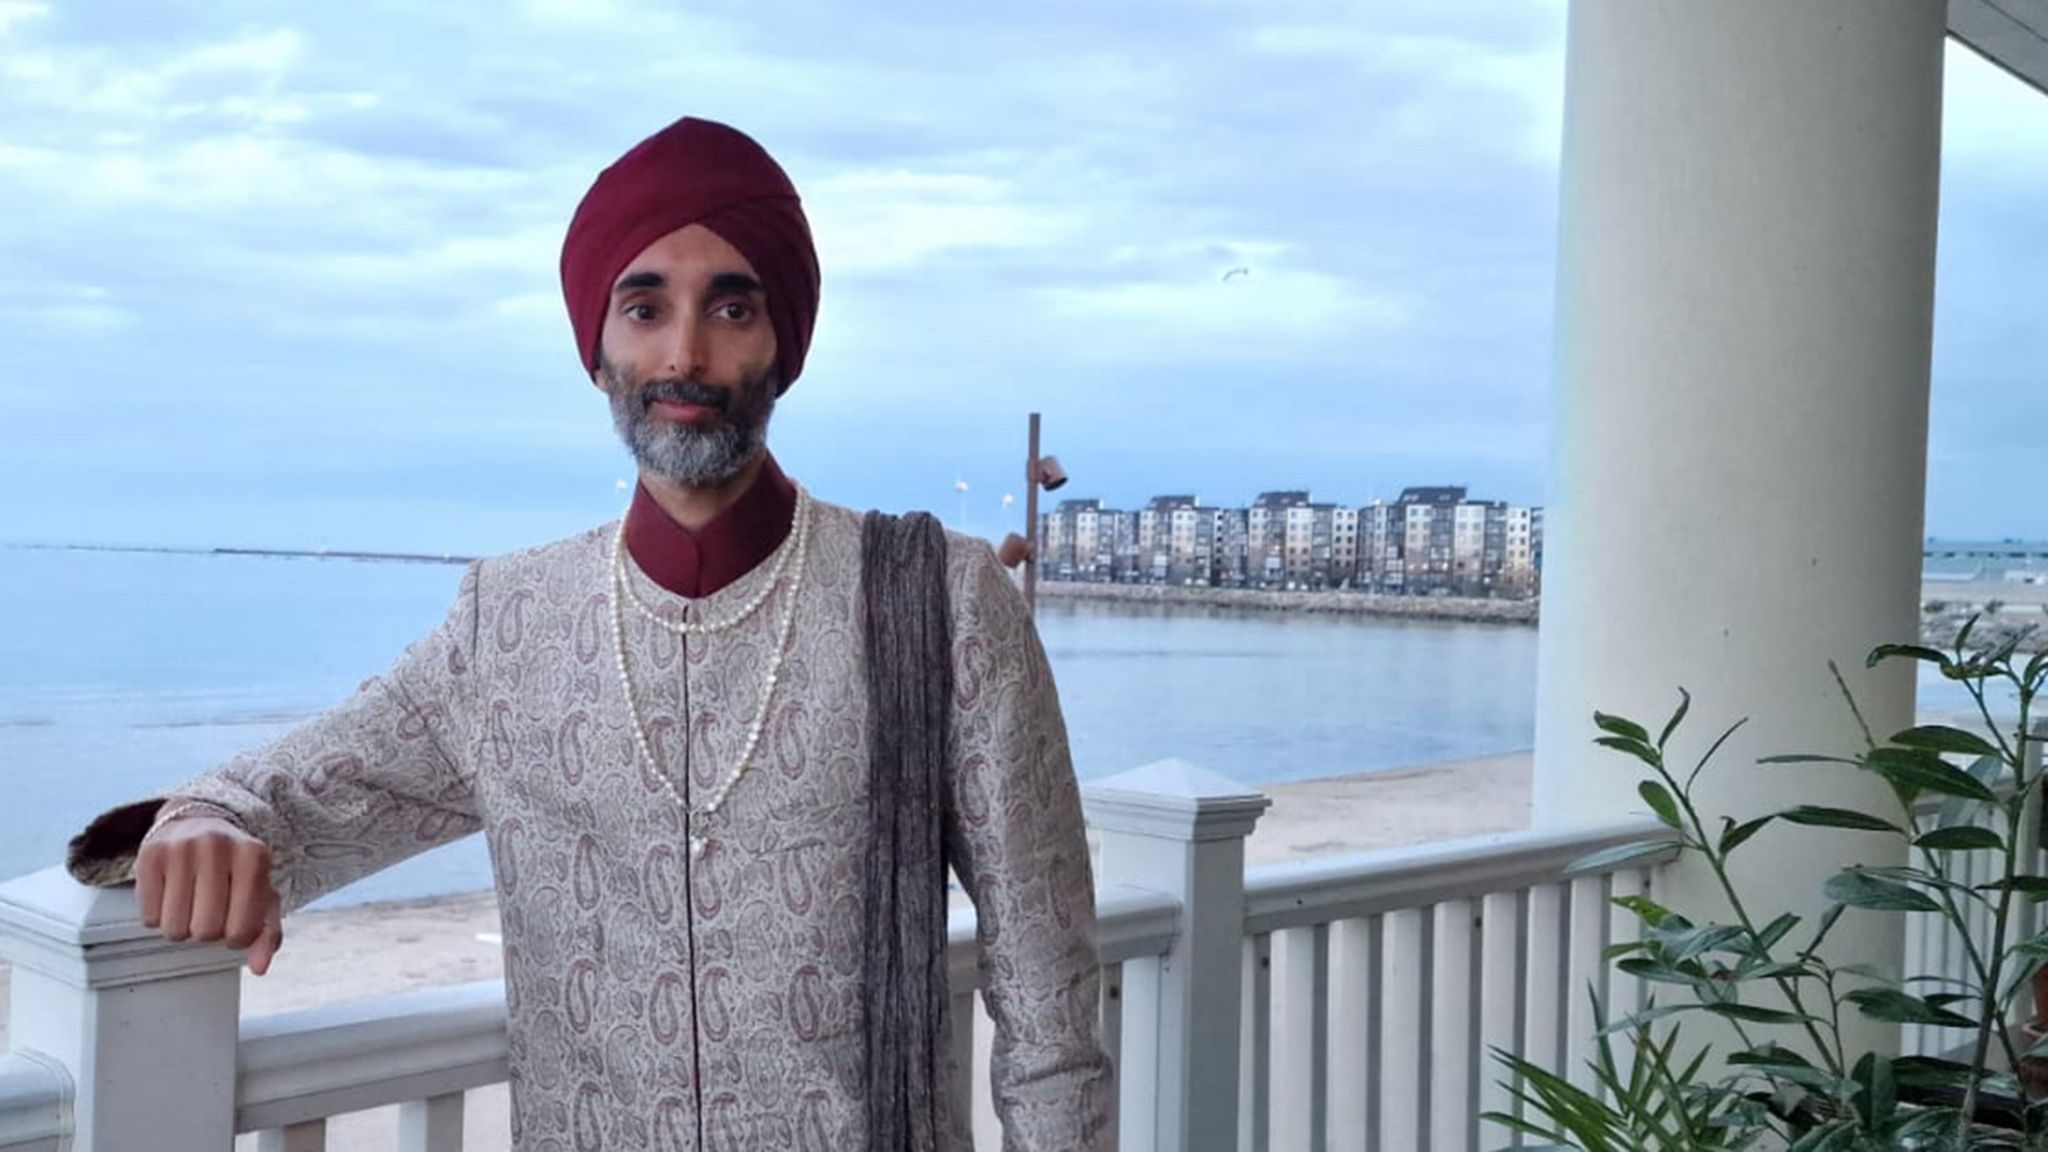 Jasvir Singh Im a devout Sikh - and married to a man pic